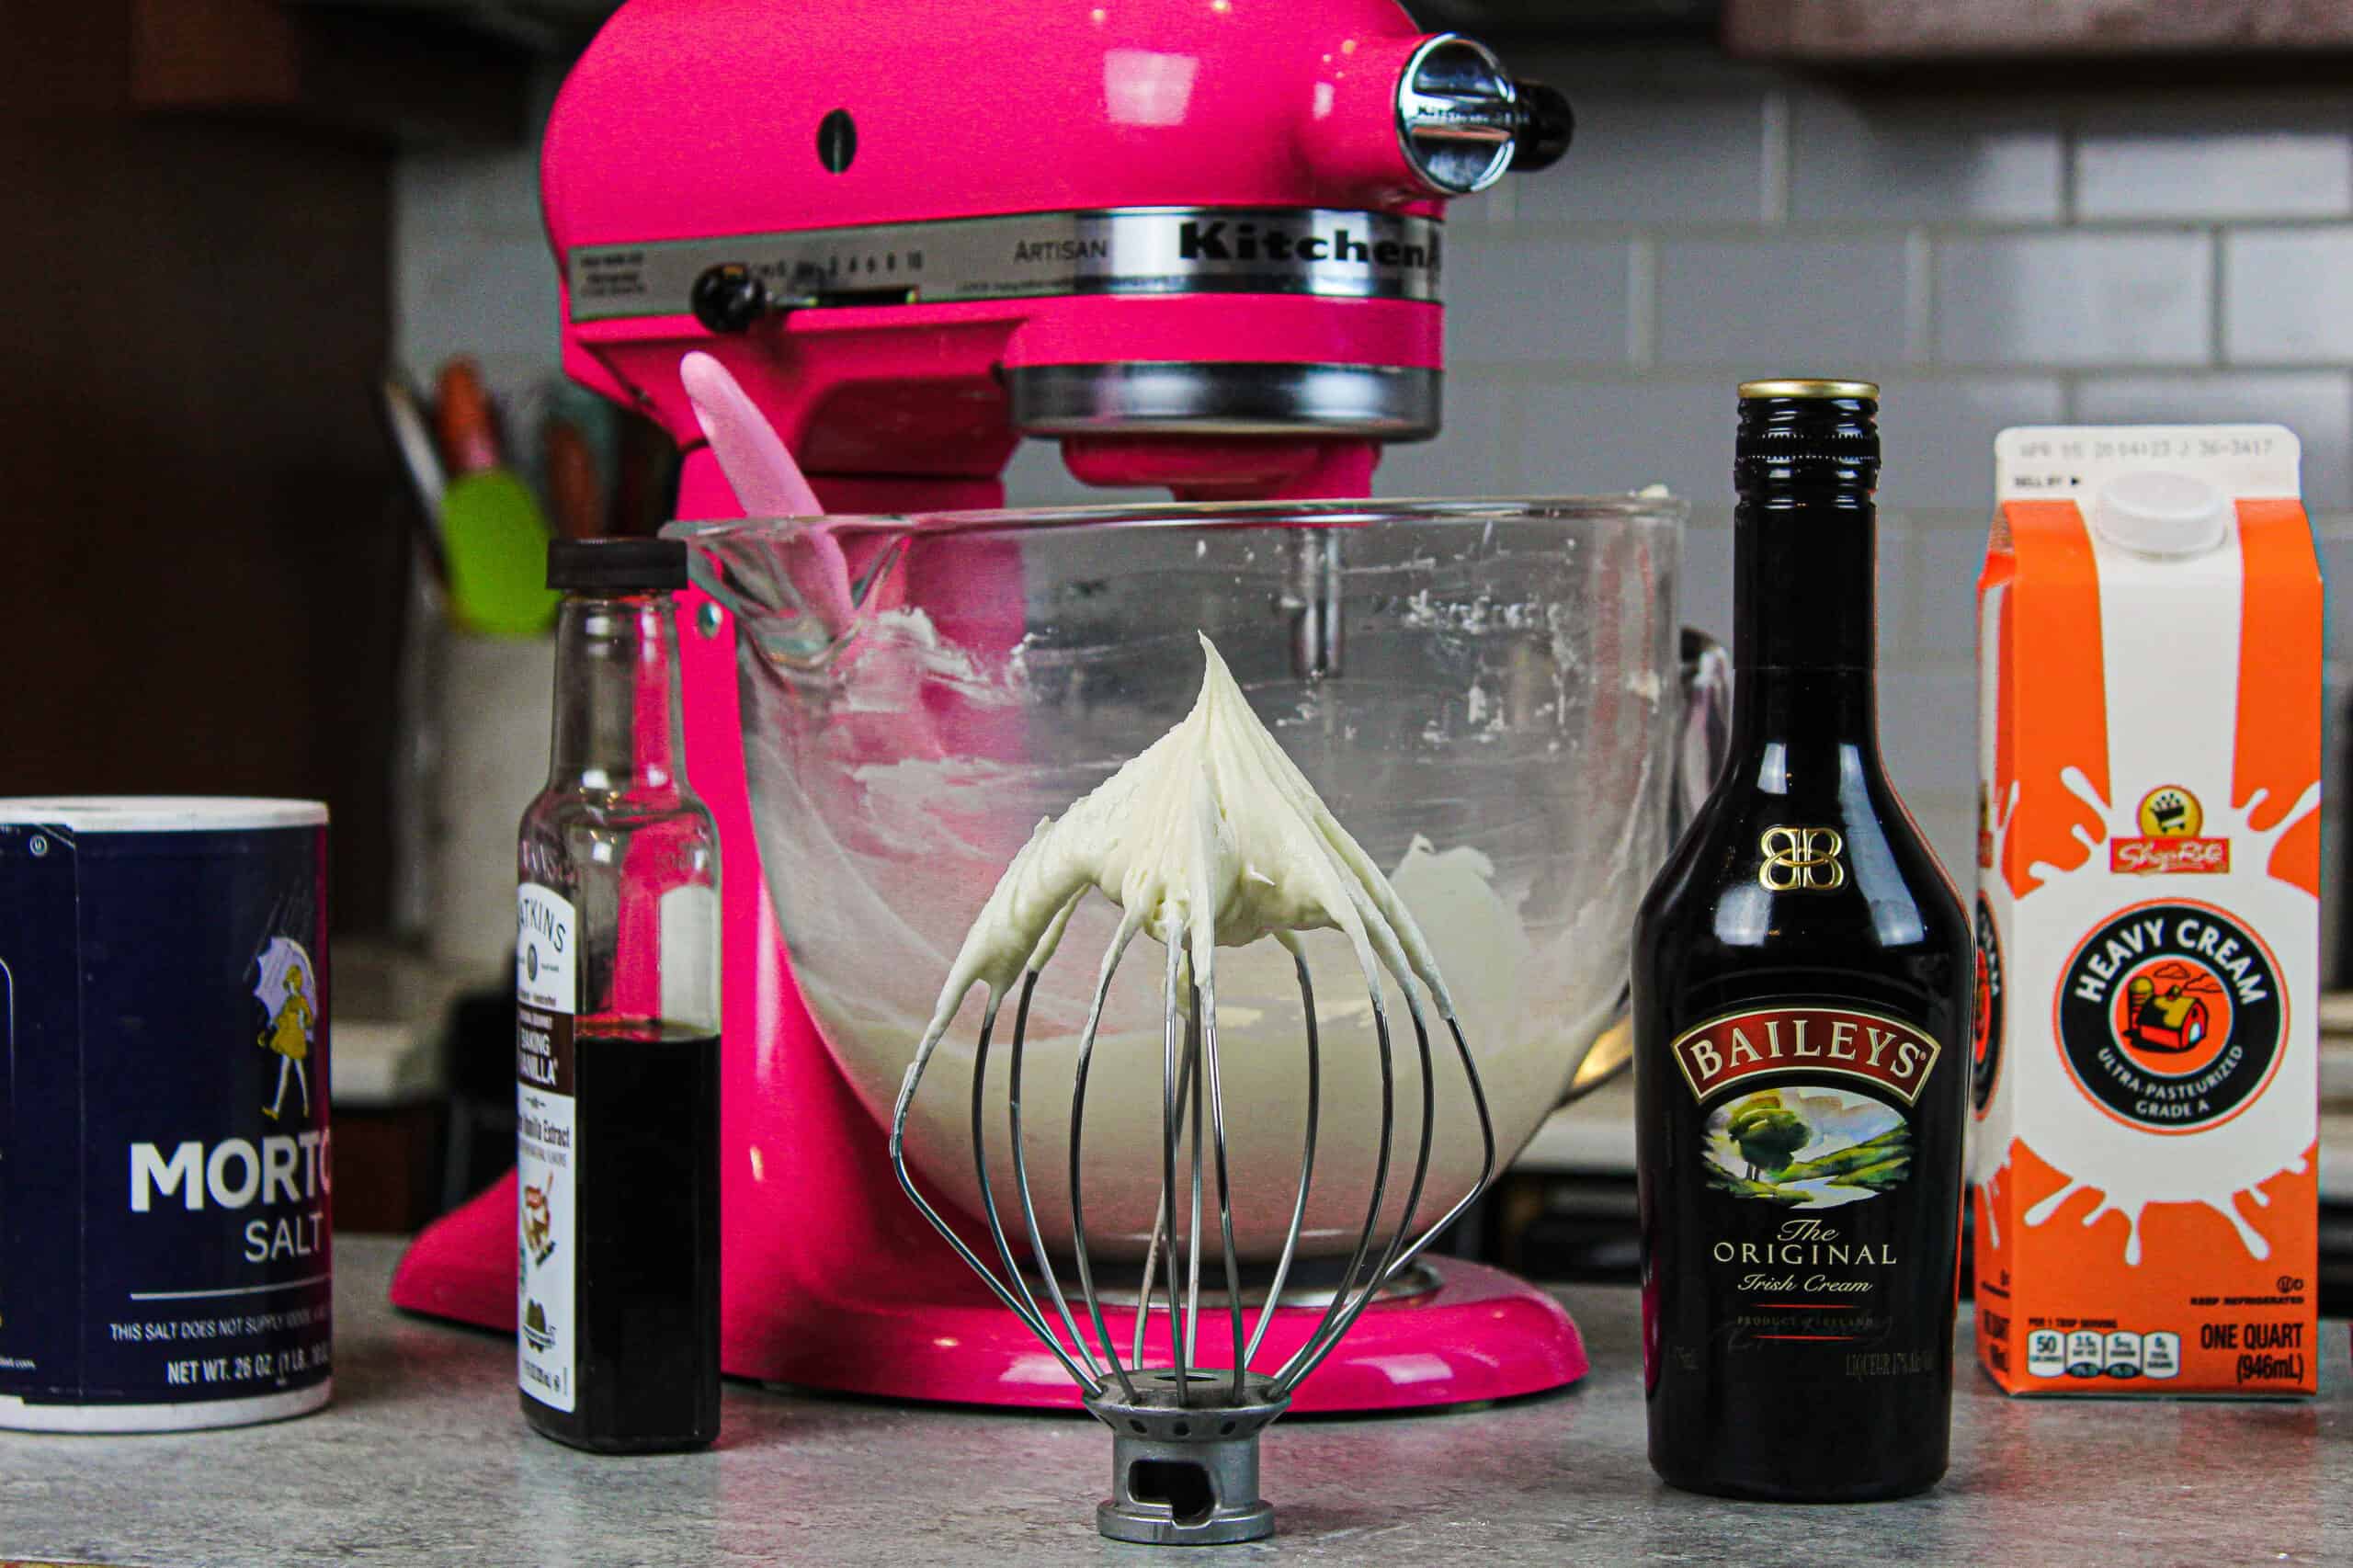 image of ingredients laid out on counter to make baileys frosting